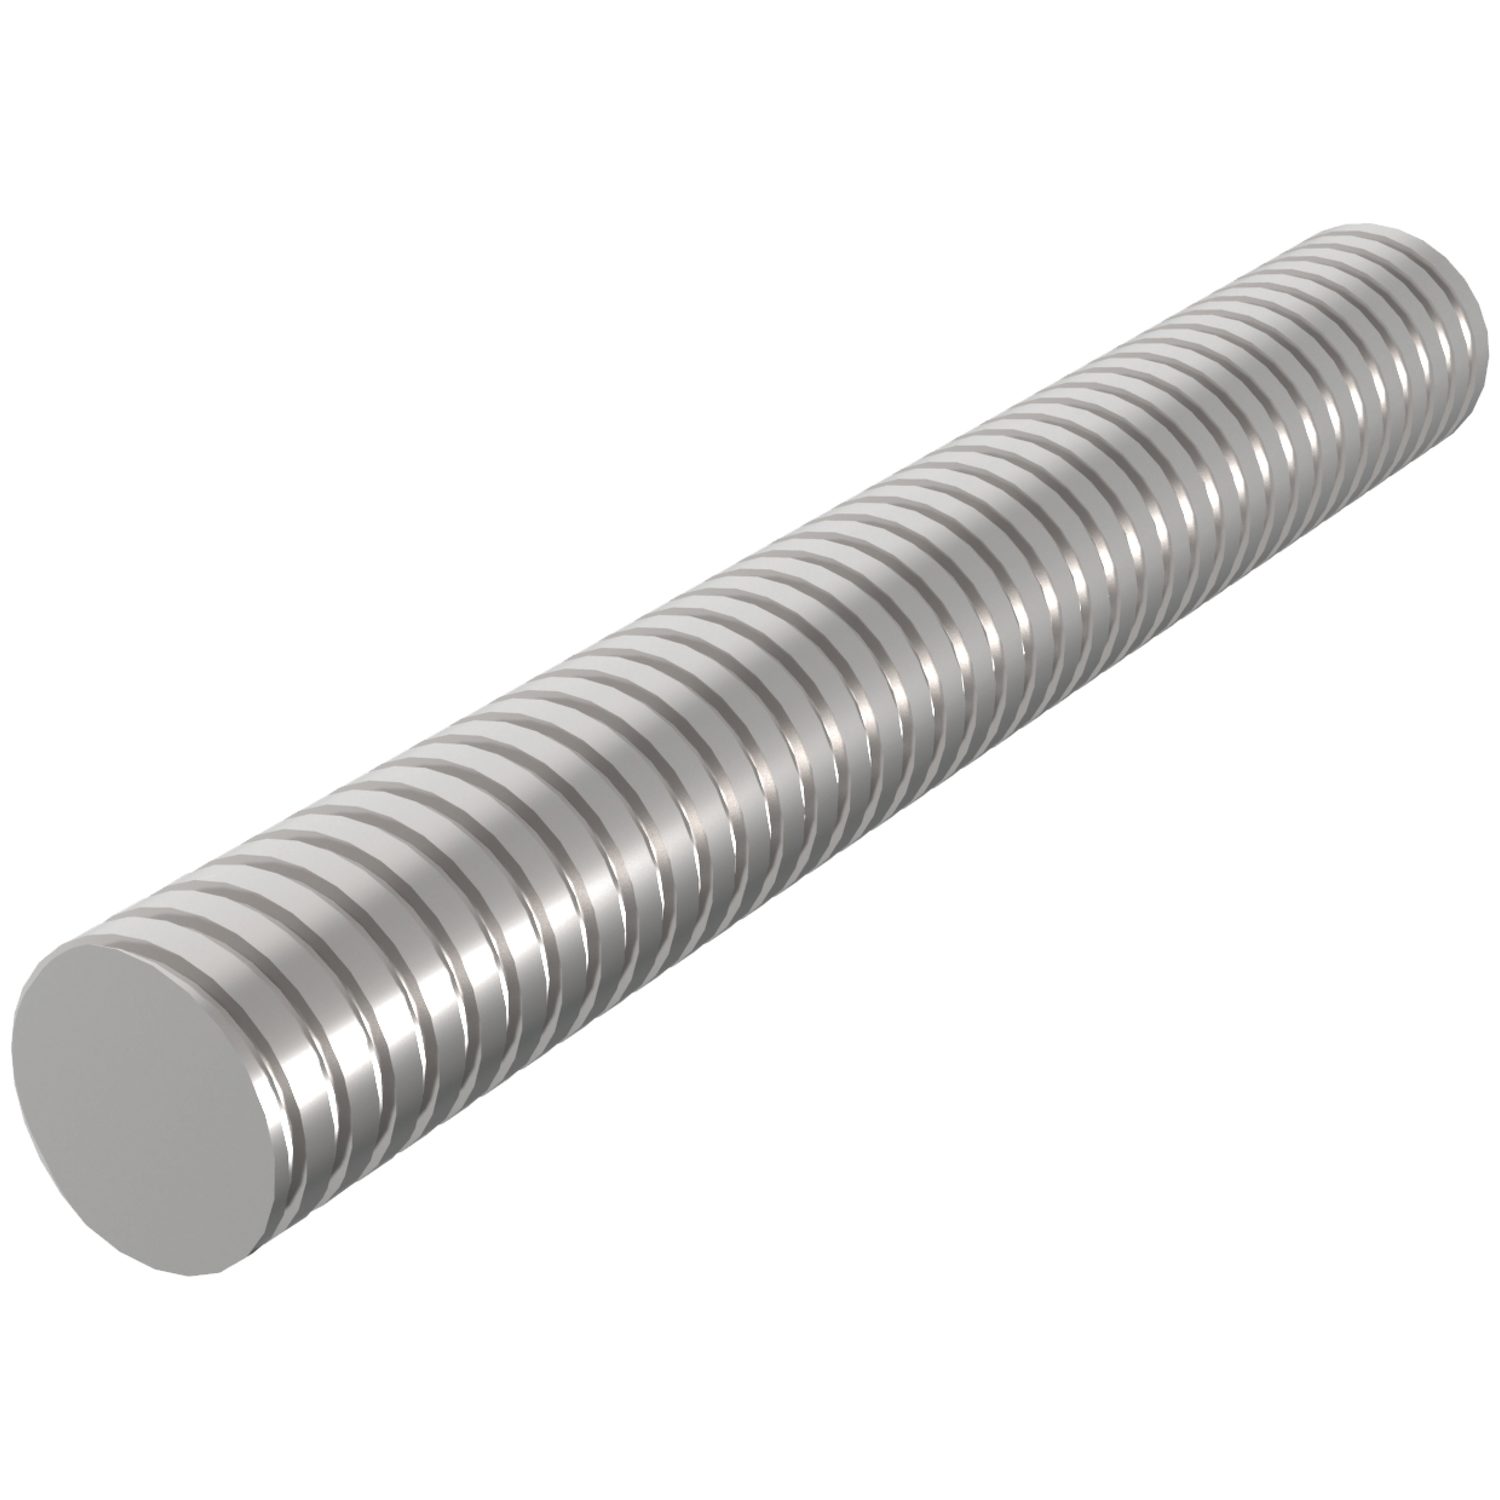 Steel Lead Screws Rolled trapezoidal C45 steel lead screws, right hand thread.  Lengths of up to 6 meters can be provided. Tr 10 to Tr 120.